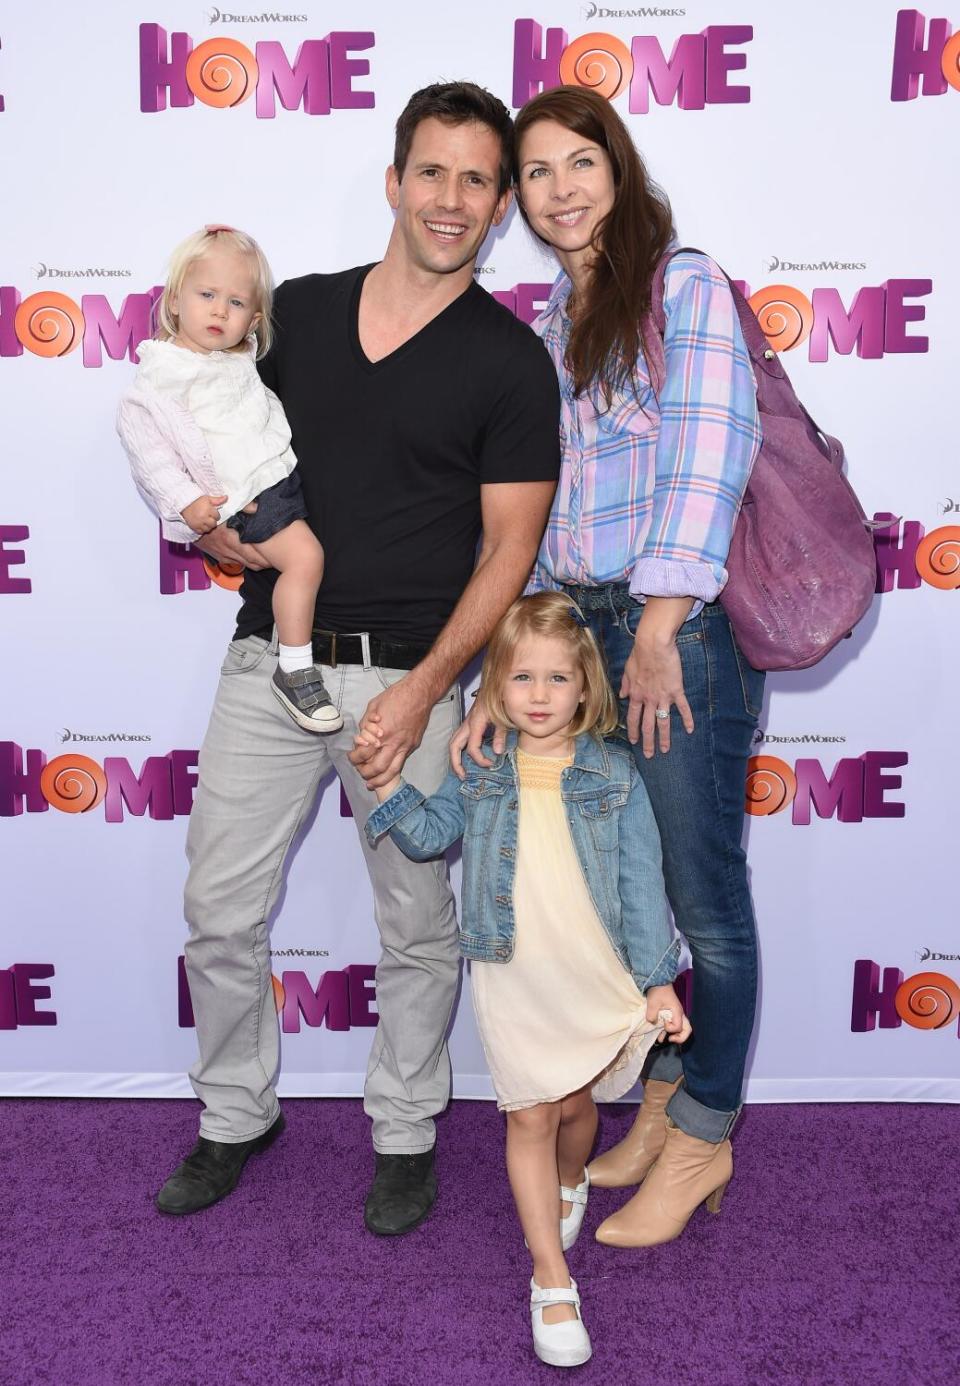 A man and a woman with long brown hair in casual clothing posing with two young children on a purple carpet